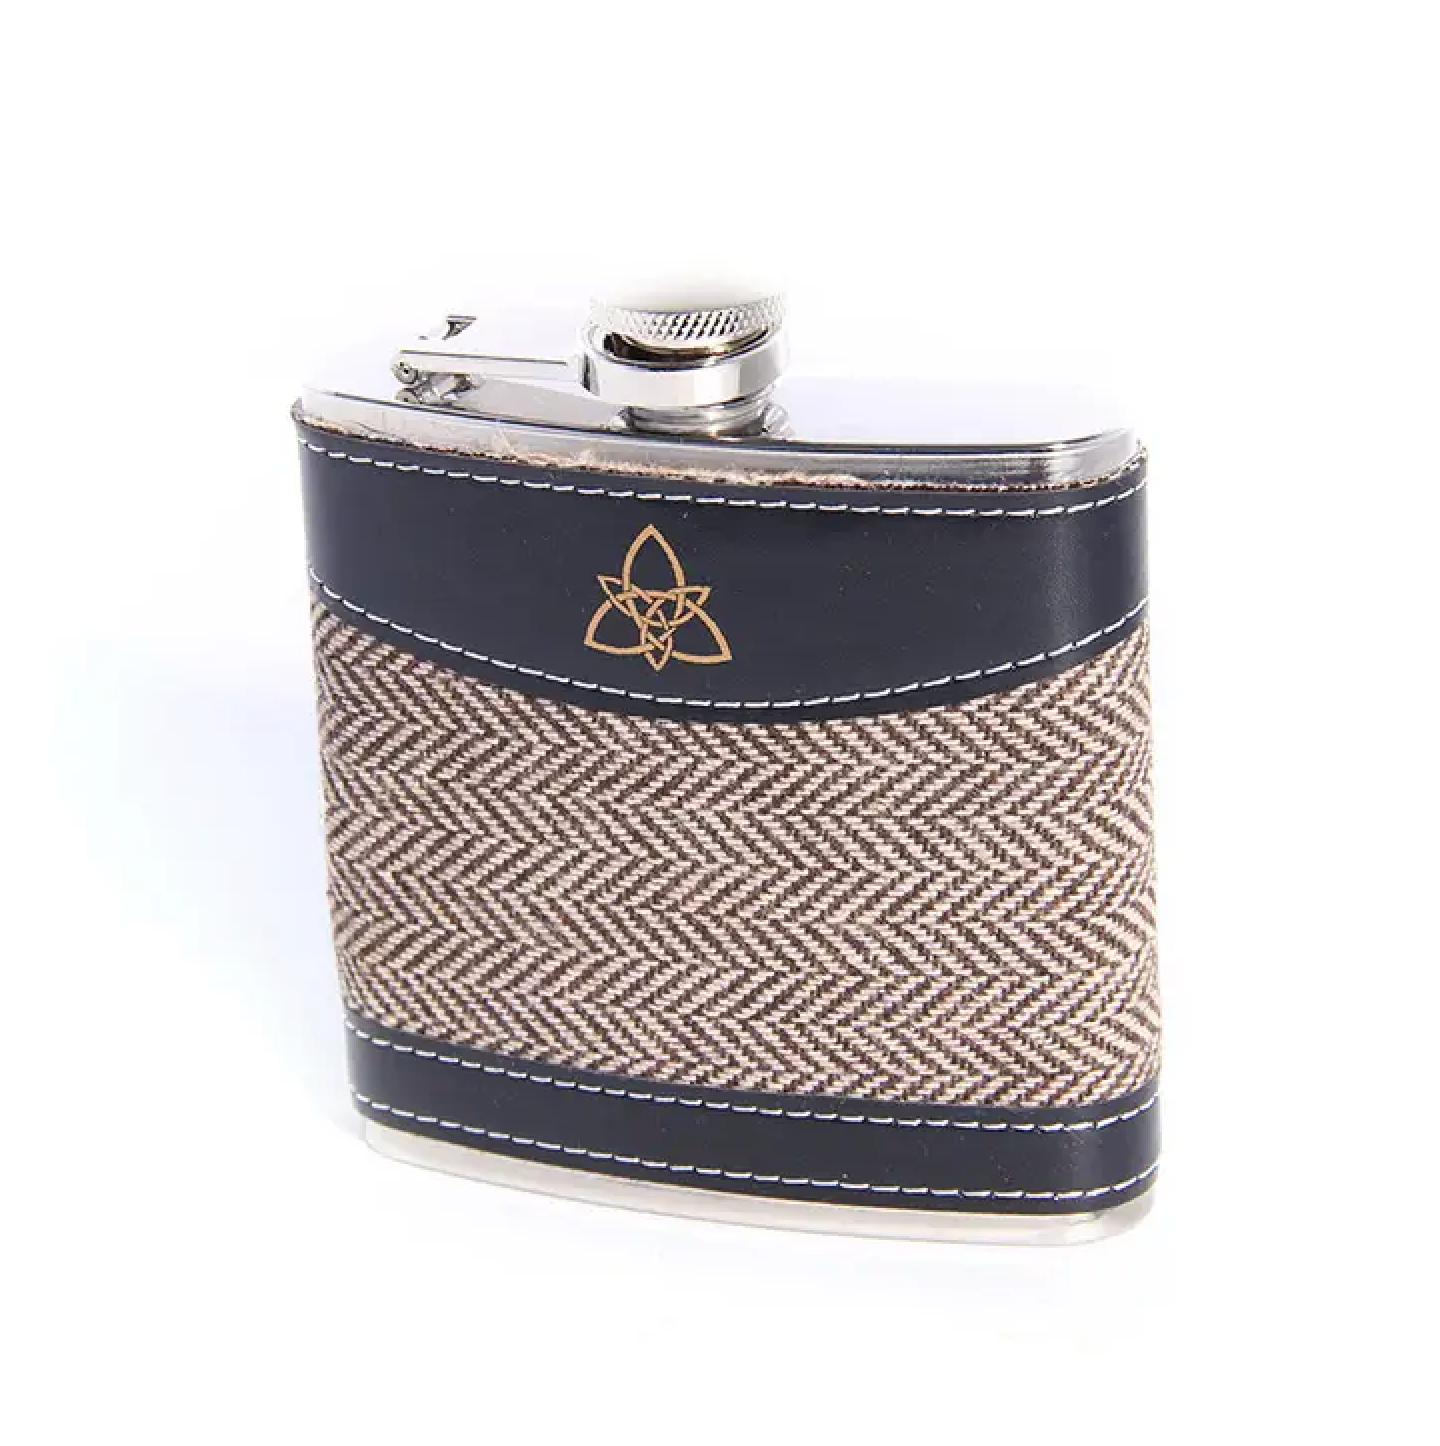 Tweed Covered Stainless Steel Flask